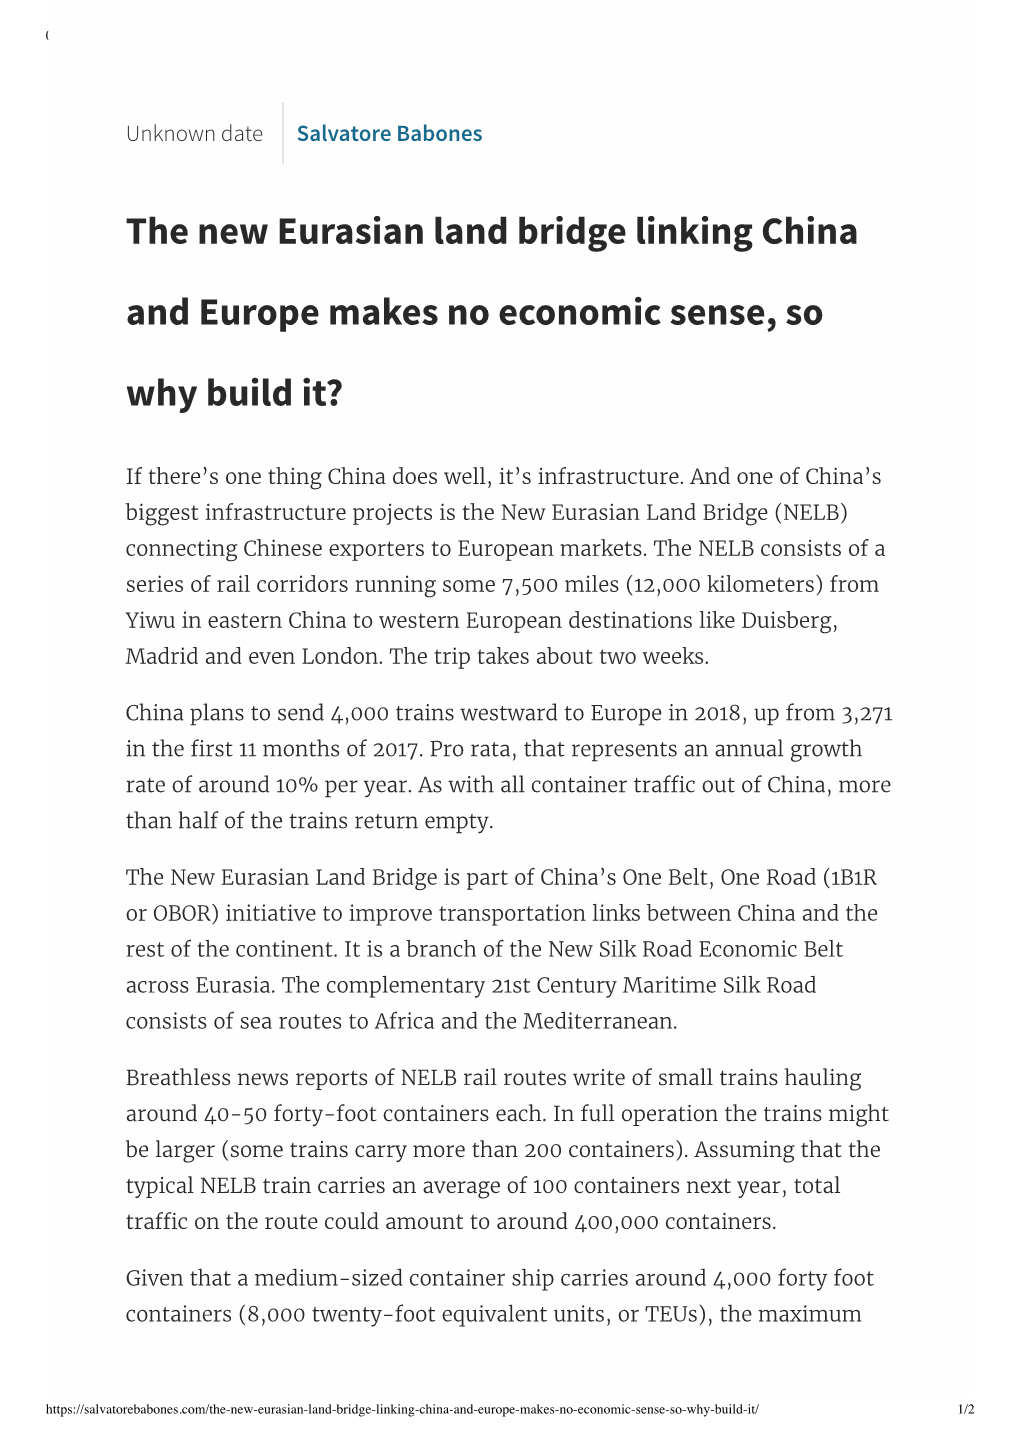 The New Eurasian Land Bridge Linking Ch..., So Why Build It? | Salvatore